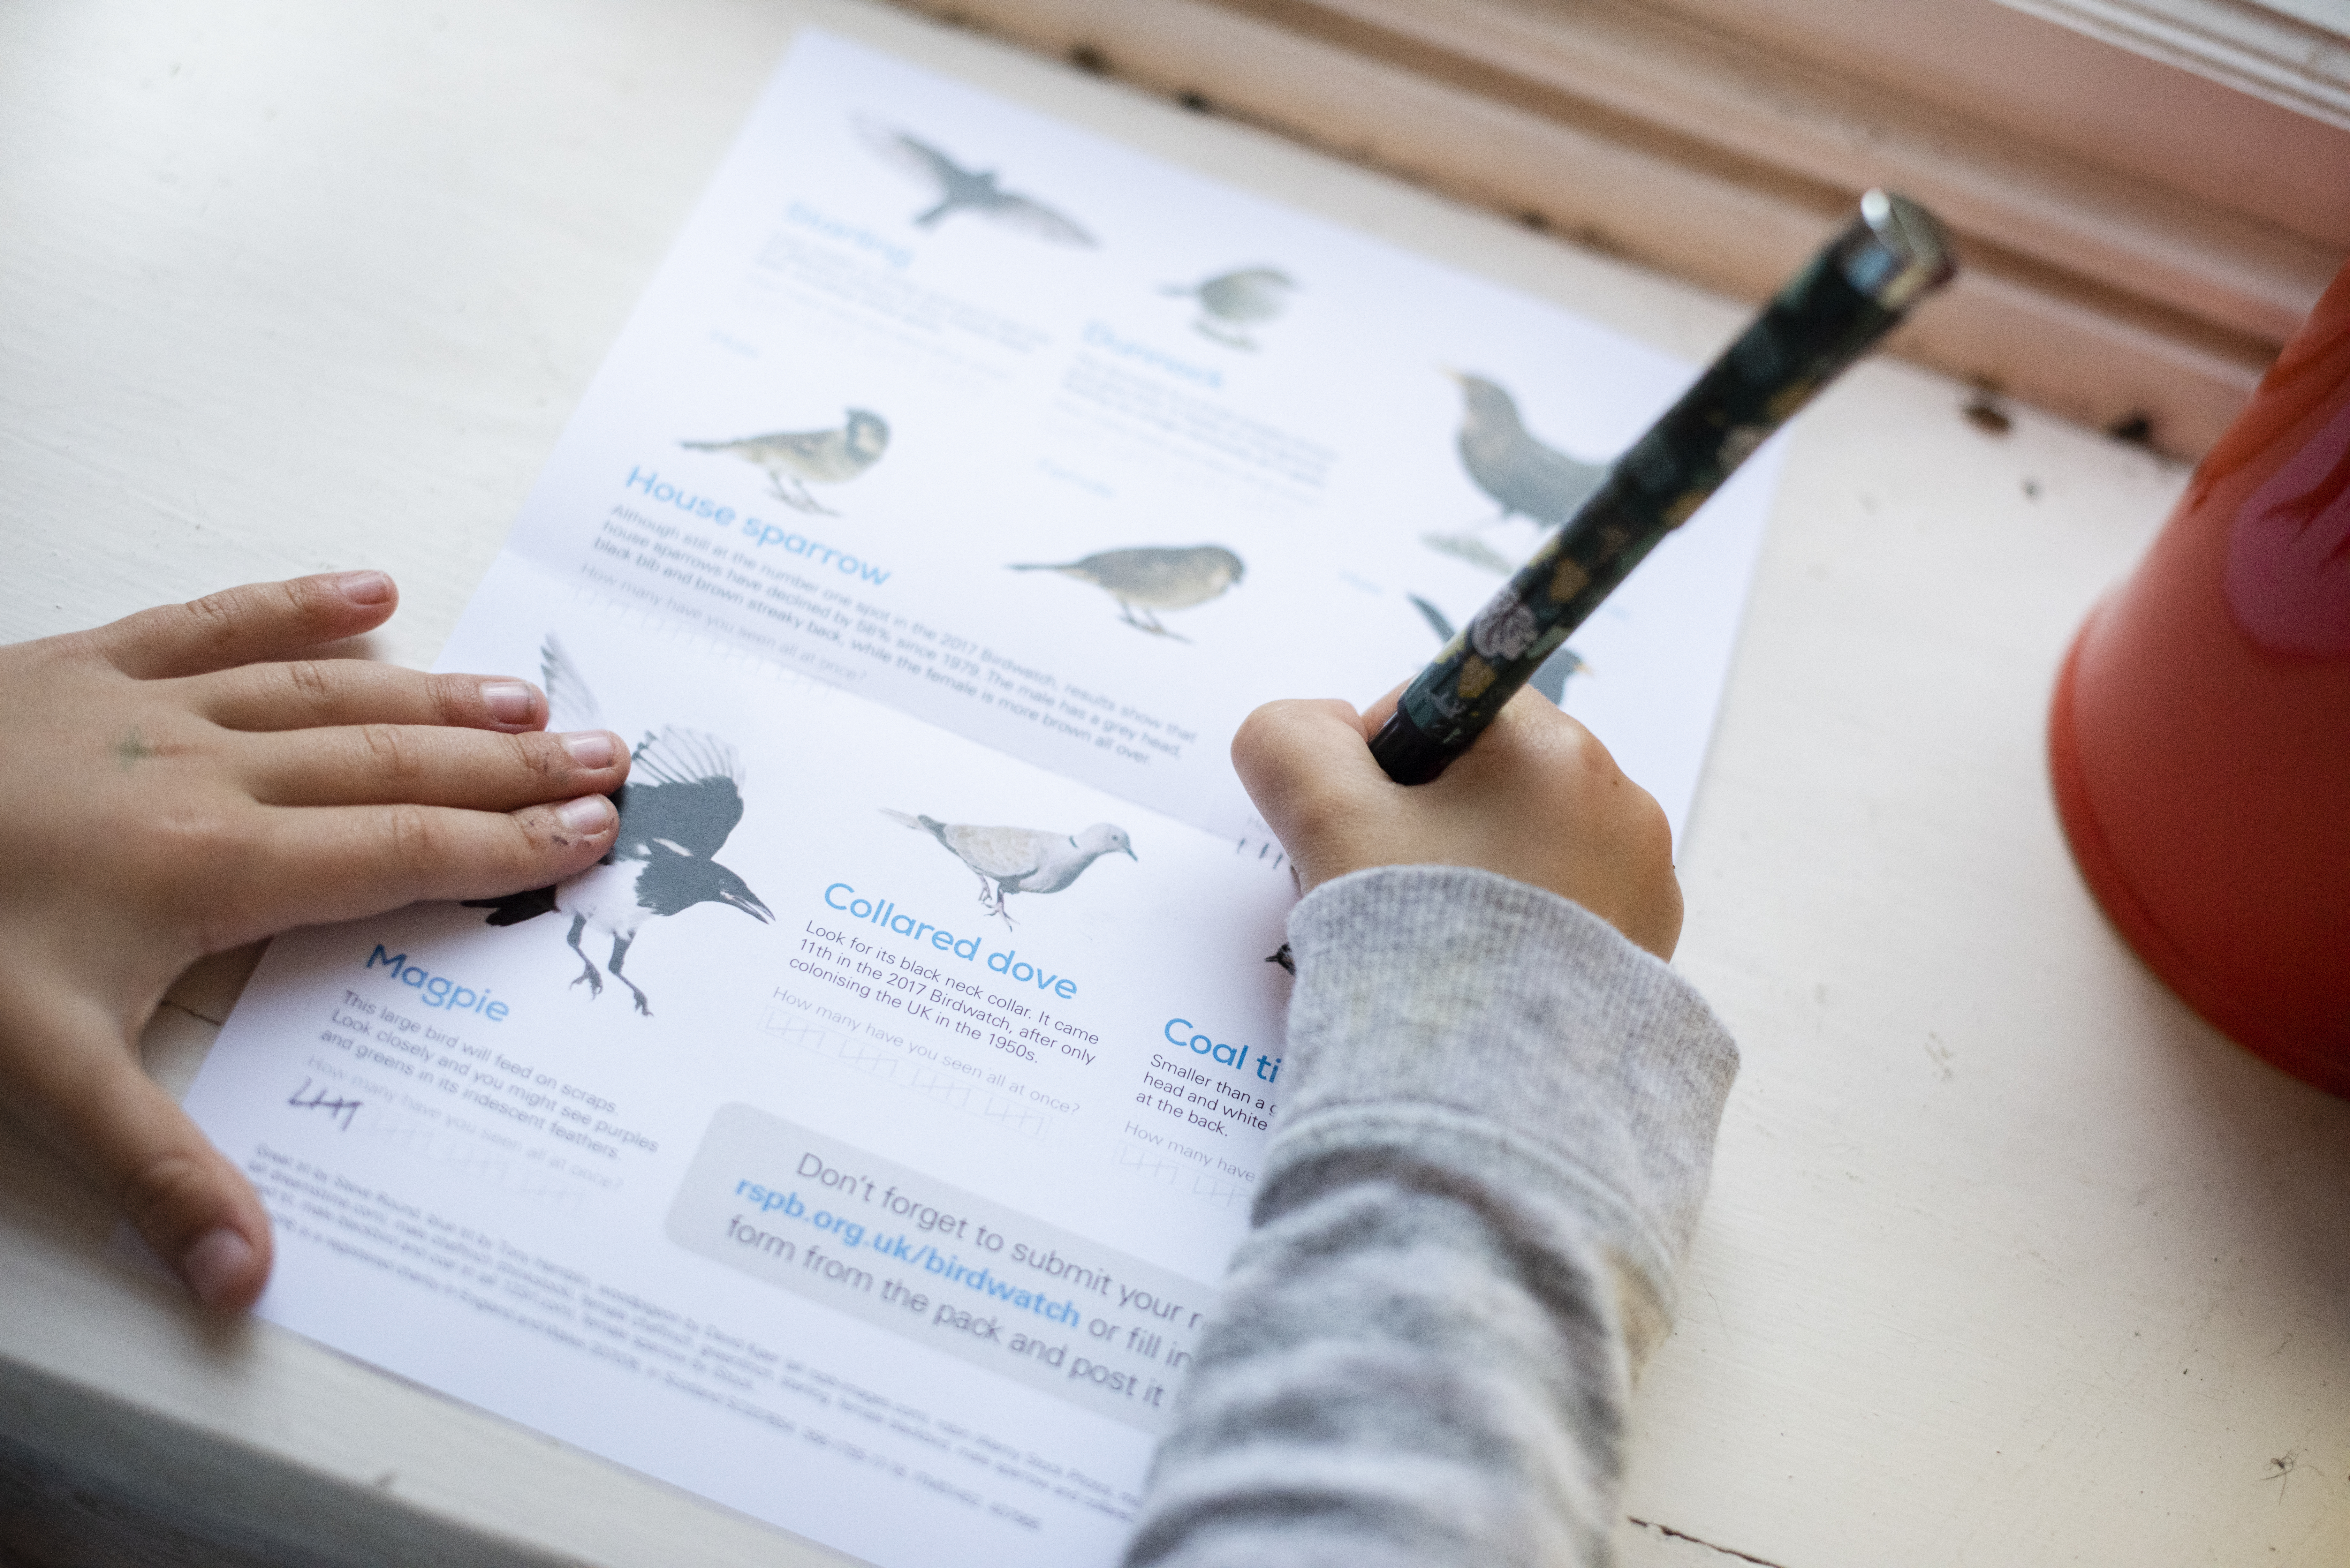 Bird identification form being filled out